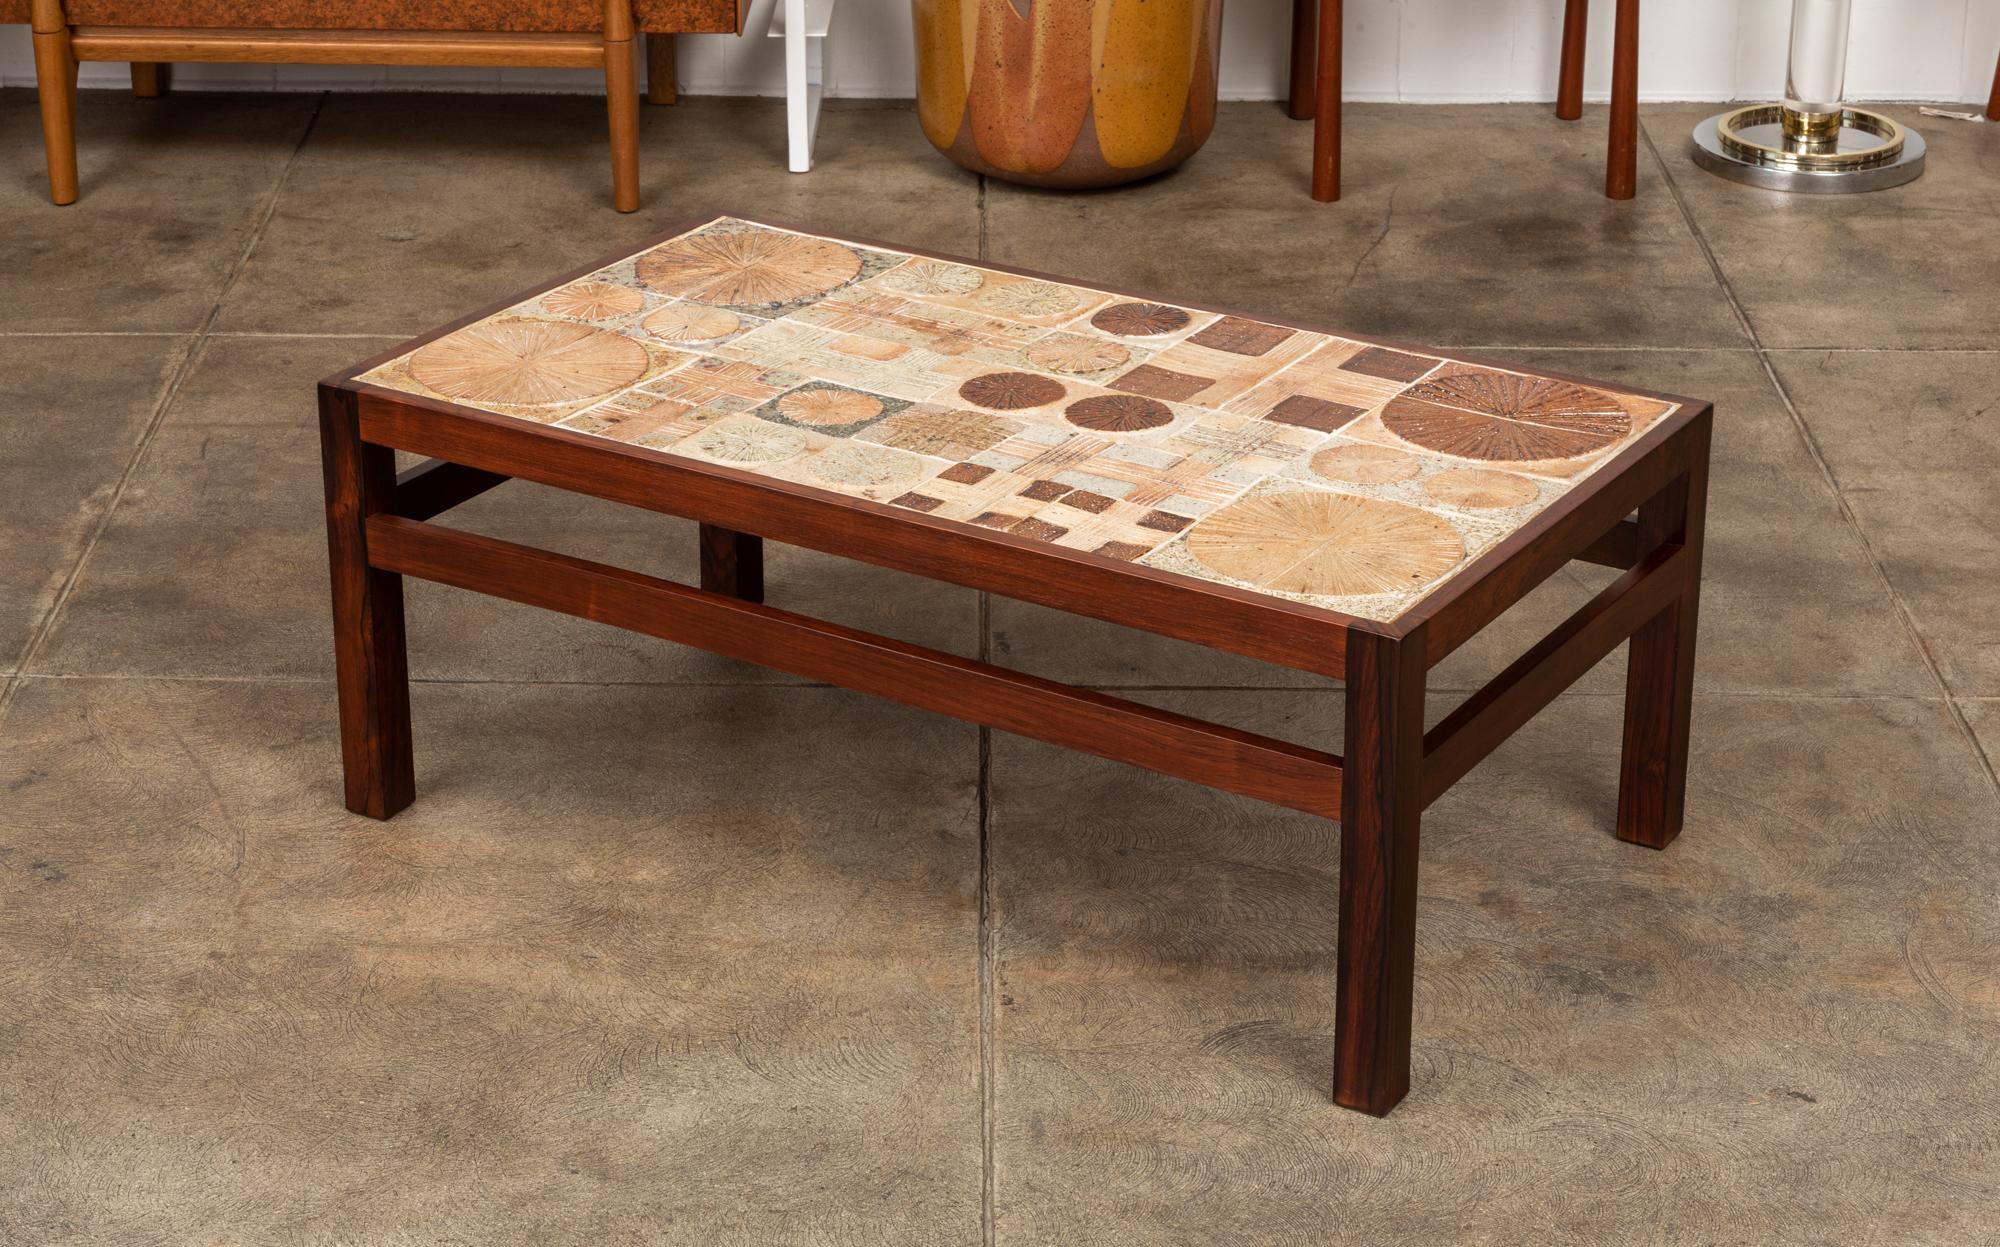 Tile topped coffee table designed by Tue Poulsen & Erik Wörtz in Denmark, for Illums Bolighus during the 1960s. The rectangular rosewood frame and square legs were designed by Wörtz and the ceramic tiles were created by artist Tue